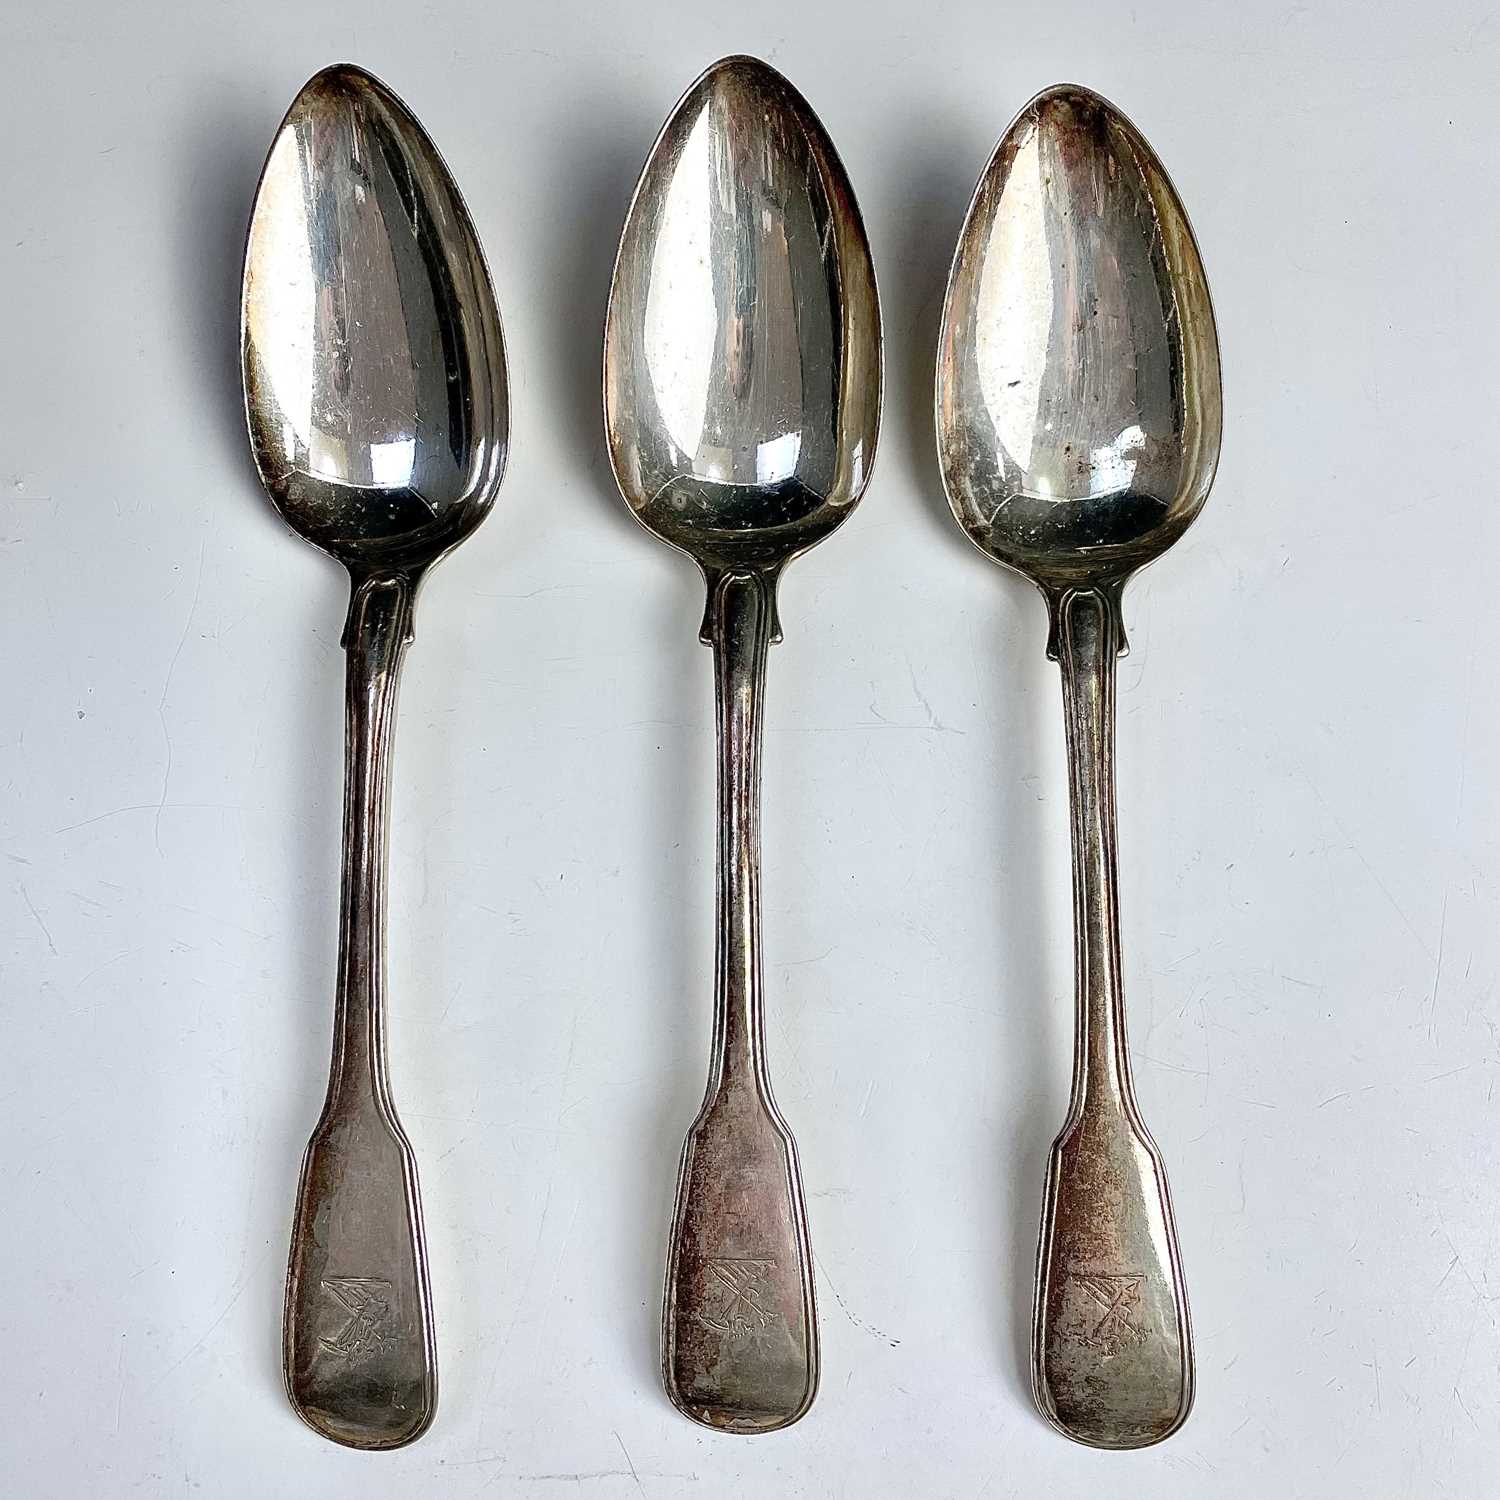 A set of three George III fiddle and thread pattern table spoons, maker F.H, London 1820/21,